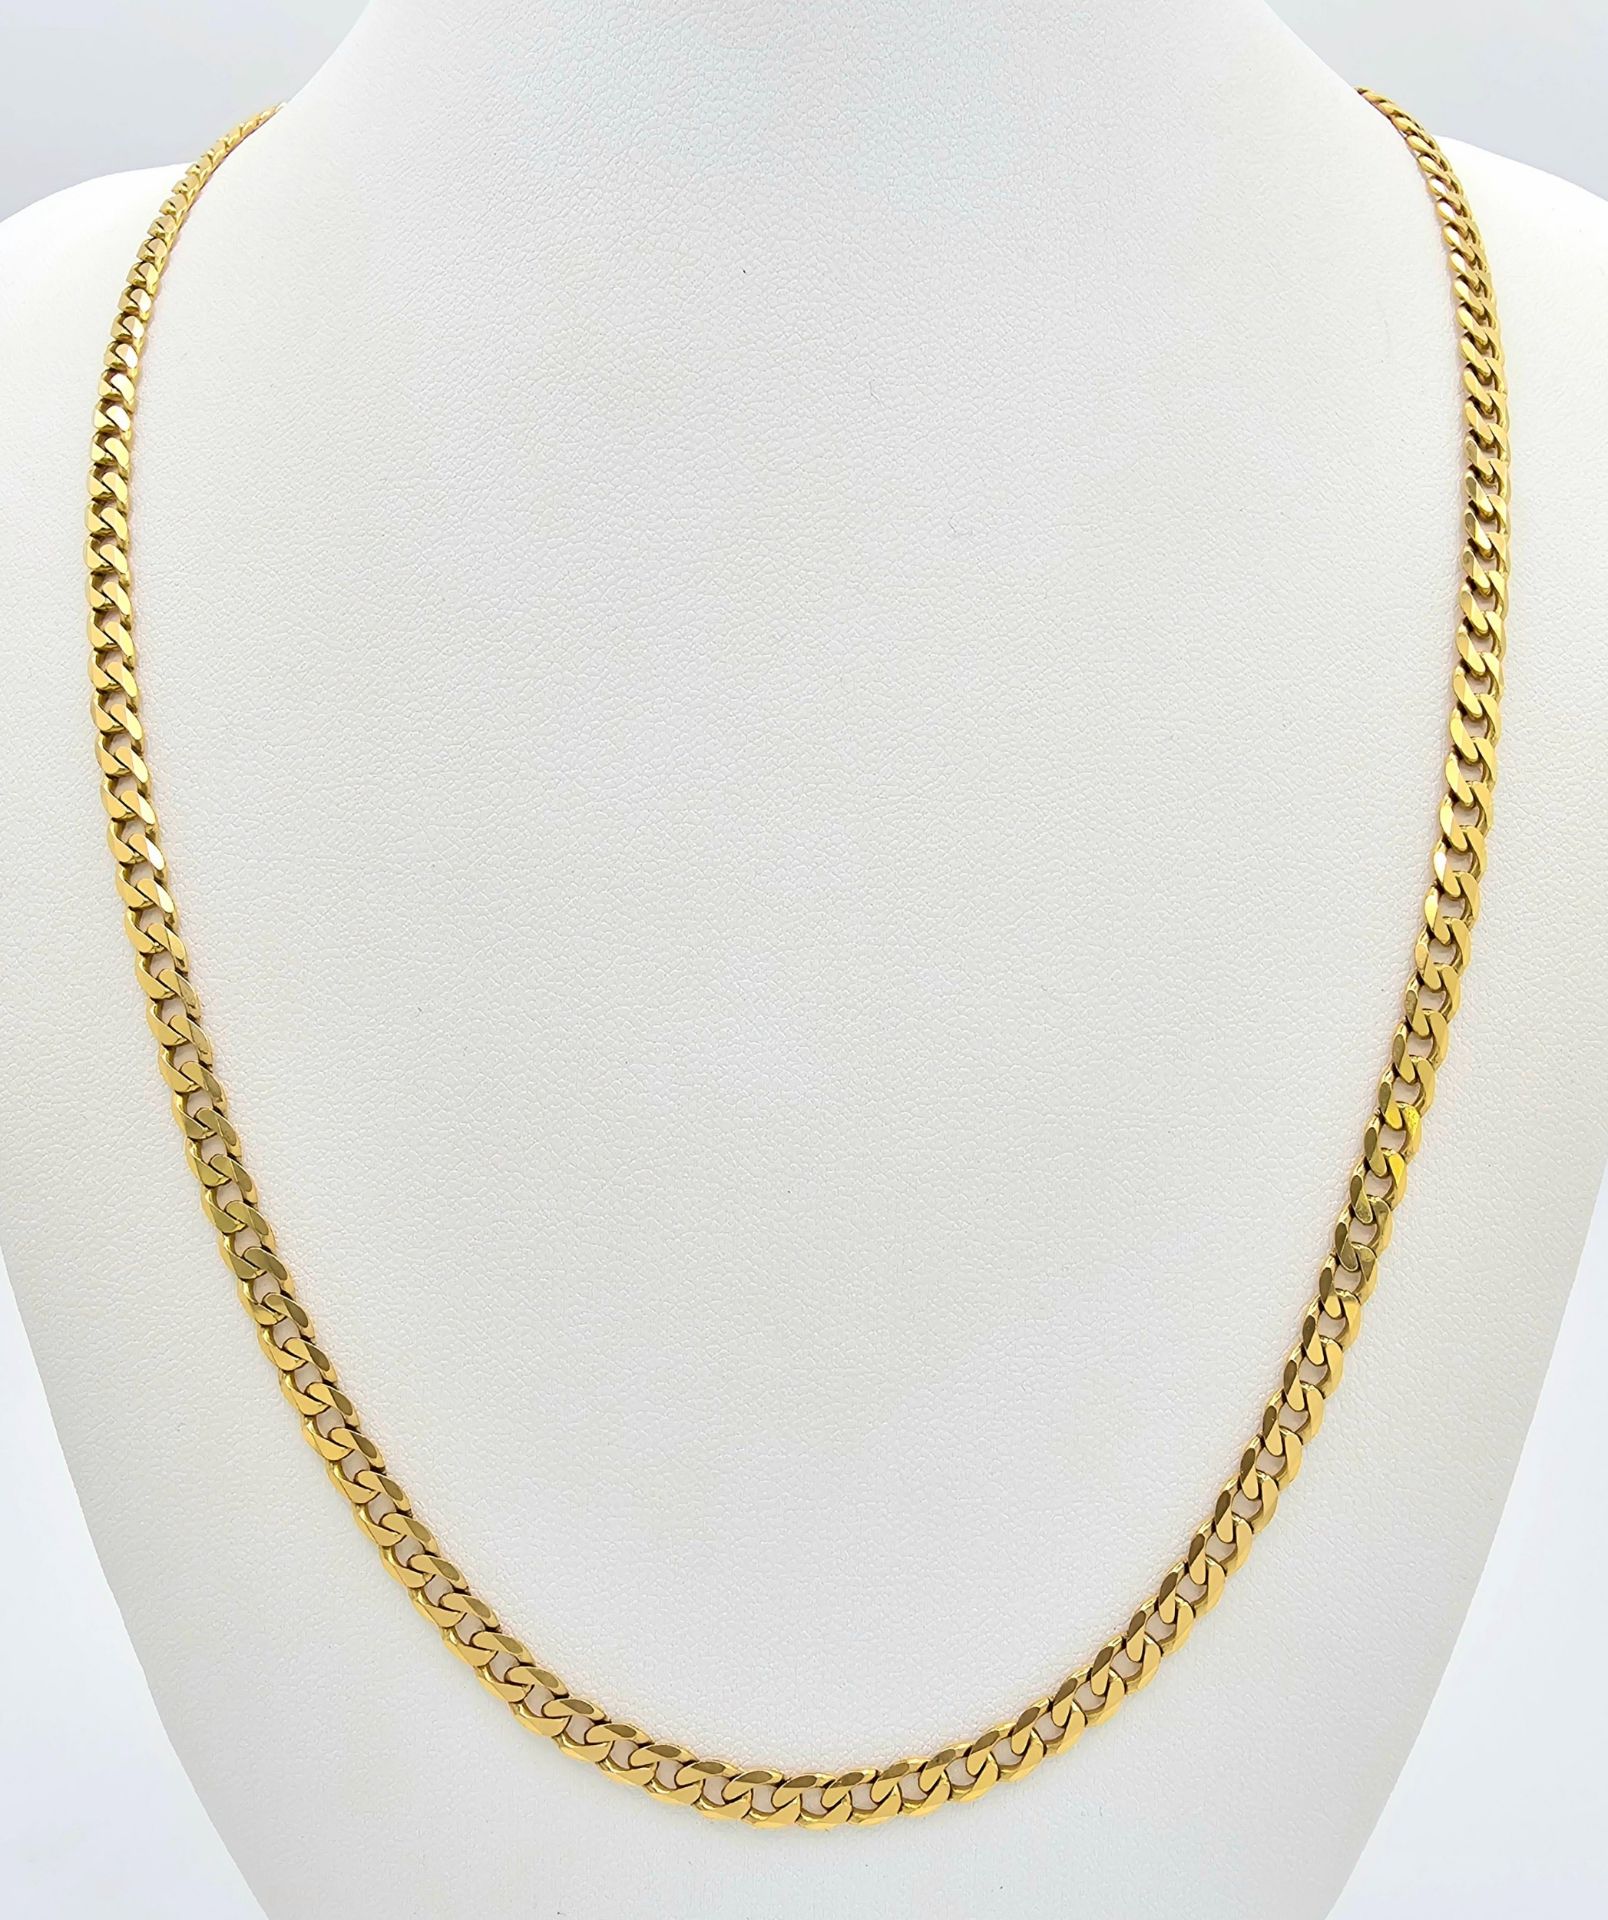 A 9 K yellow gold flat chain necklace, length: 56 cm, weight: 17.2